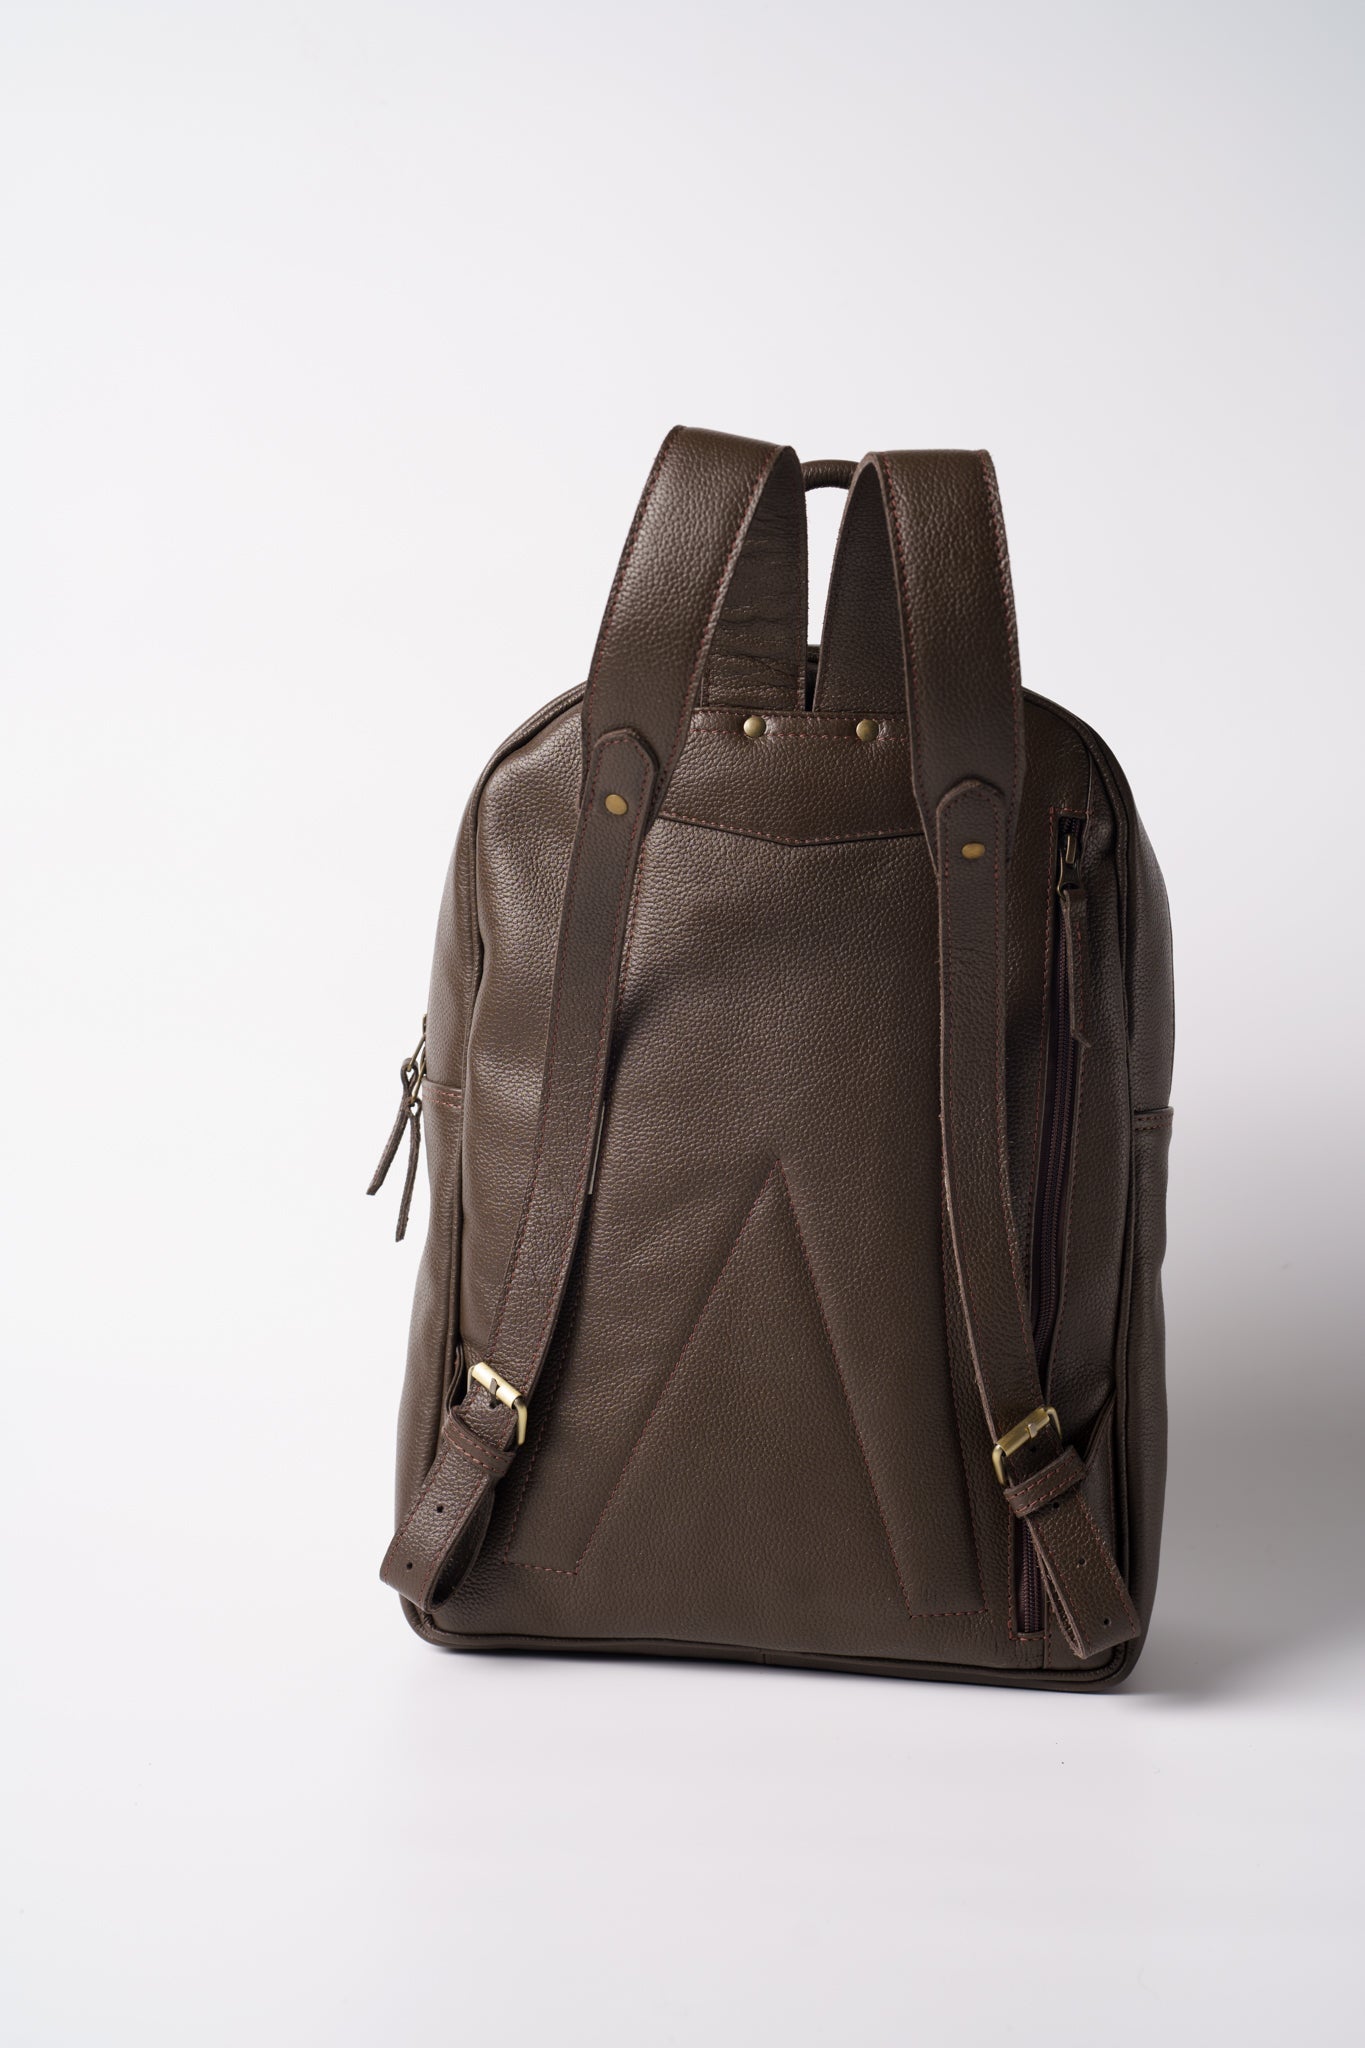 Rear view of Chamra's chocolate brown leather bag. The image showcases the premium hand carry strap and adjustable shoulder straps with metallic buckles and buttons that function to make the bag more durable.